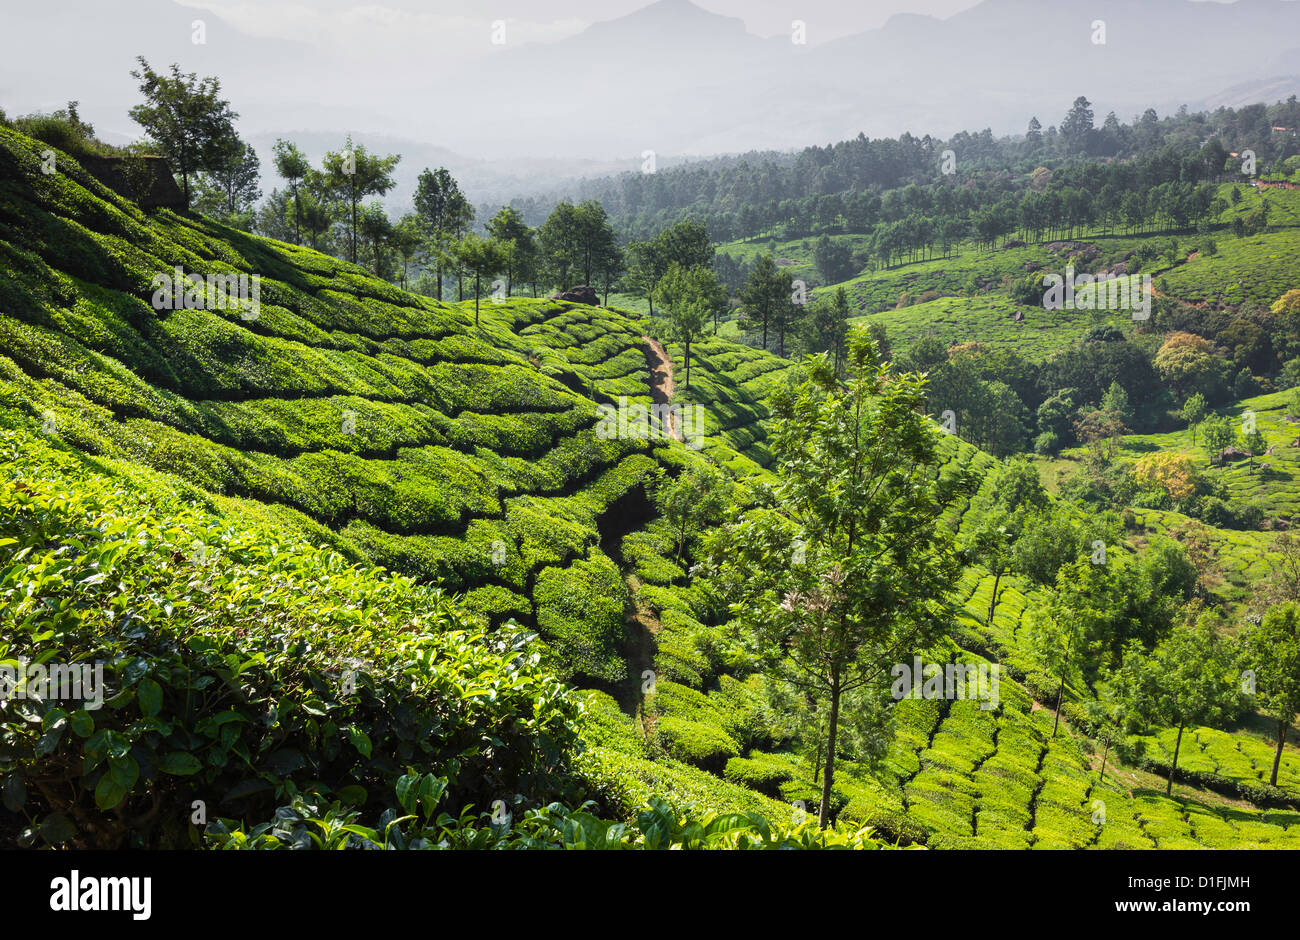 Tea plantation in Munnar, Kerala, India showing rows of tea trees and the undulating landscape of the Kannan Devan Hills. Stock Photo